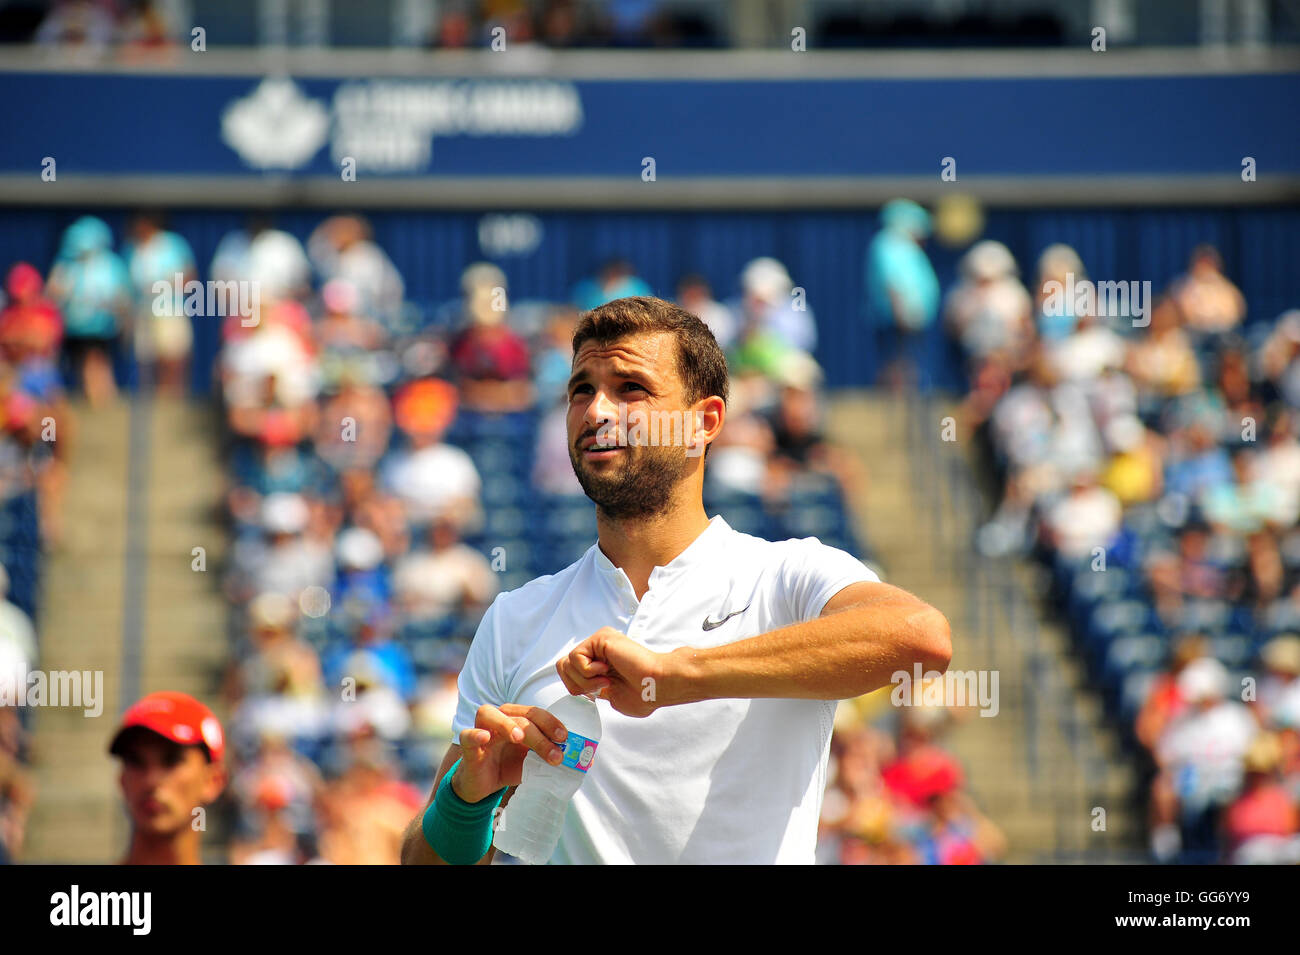 The Bulgarian tennis player Grigor Dimitrov at the 2016 Rogers Cup tournament in Toronto, Canada. Stock Photo